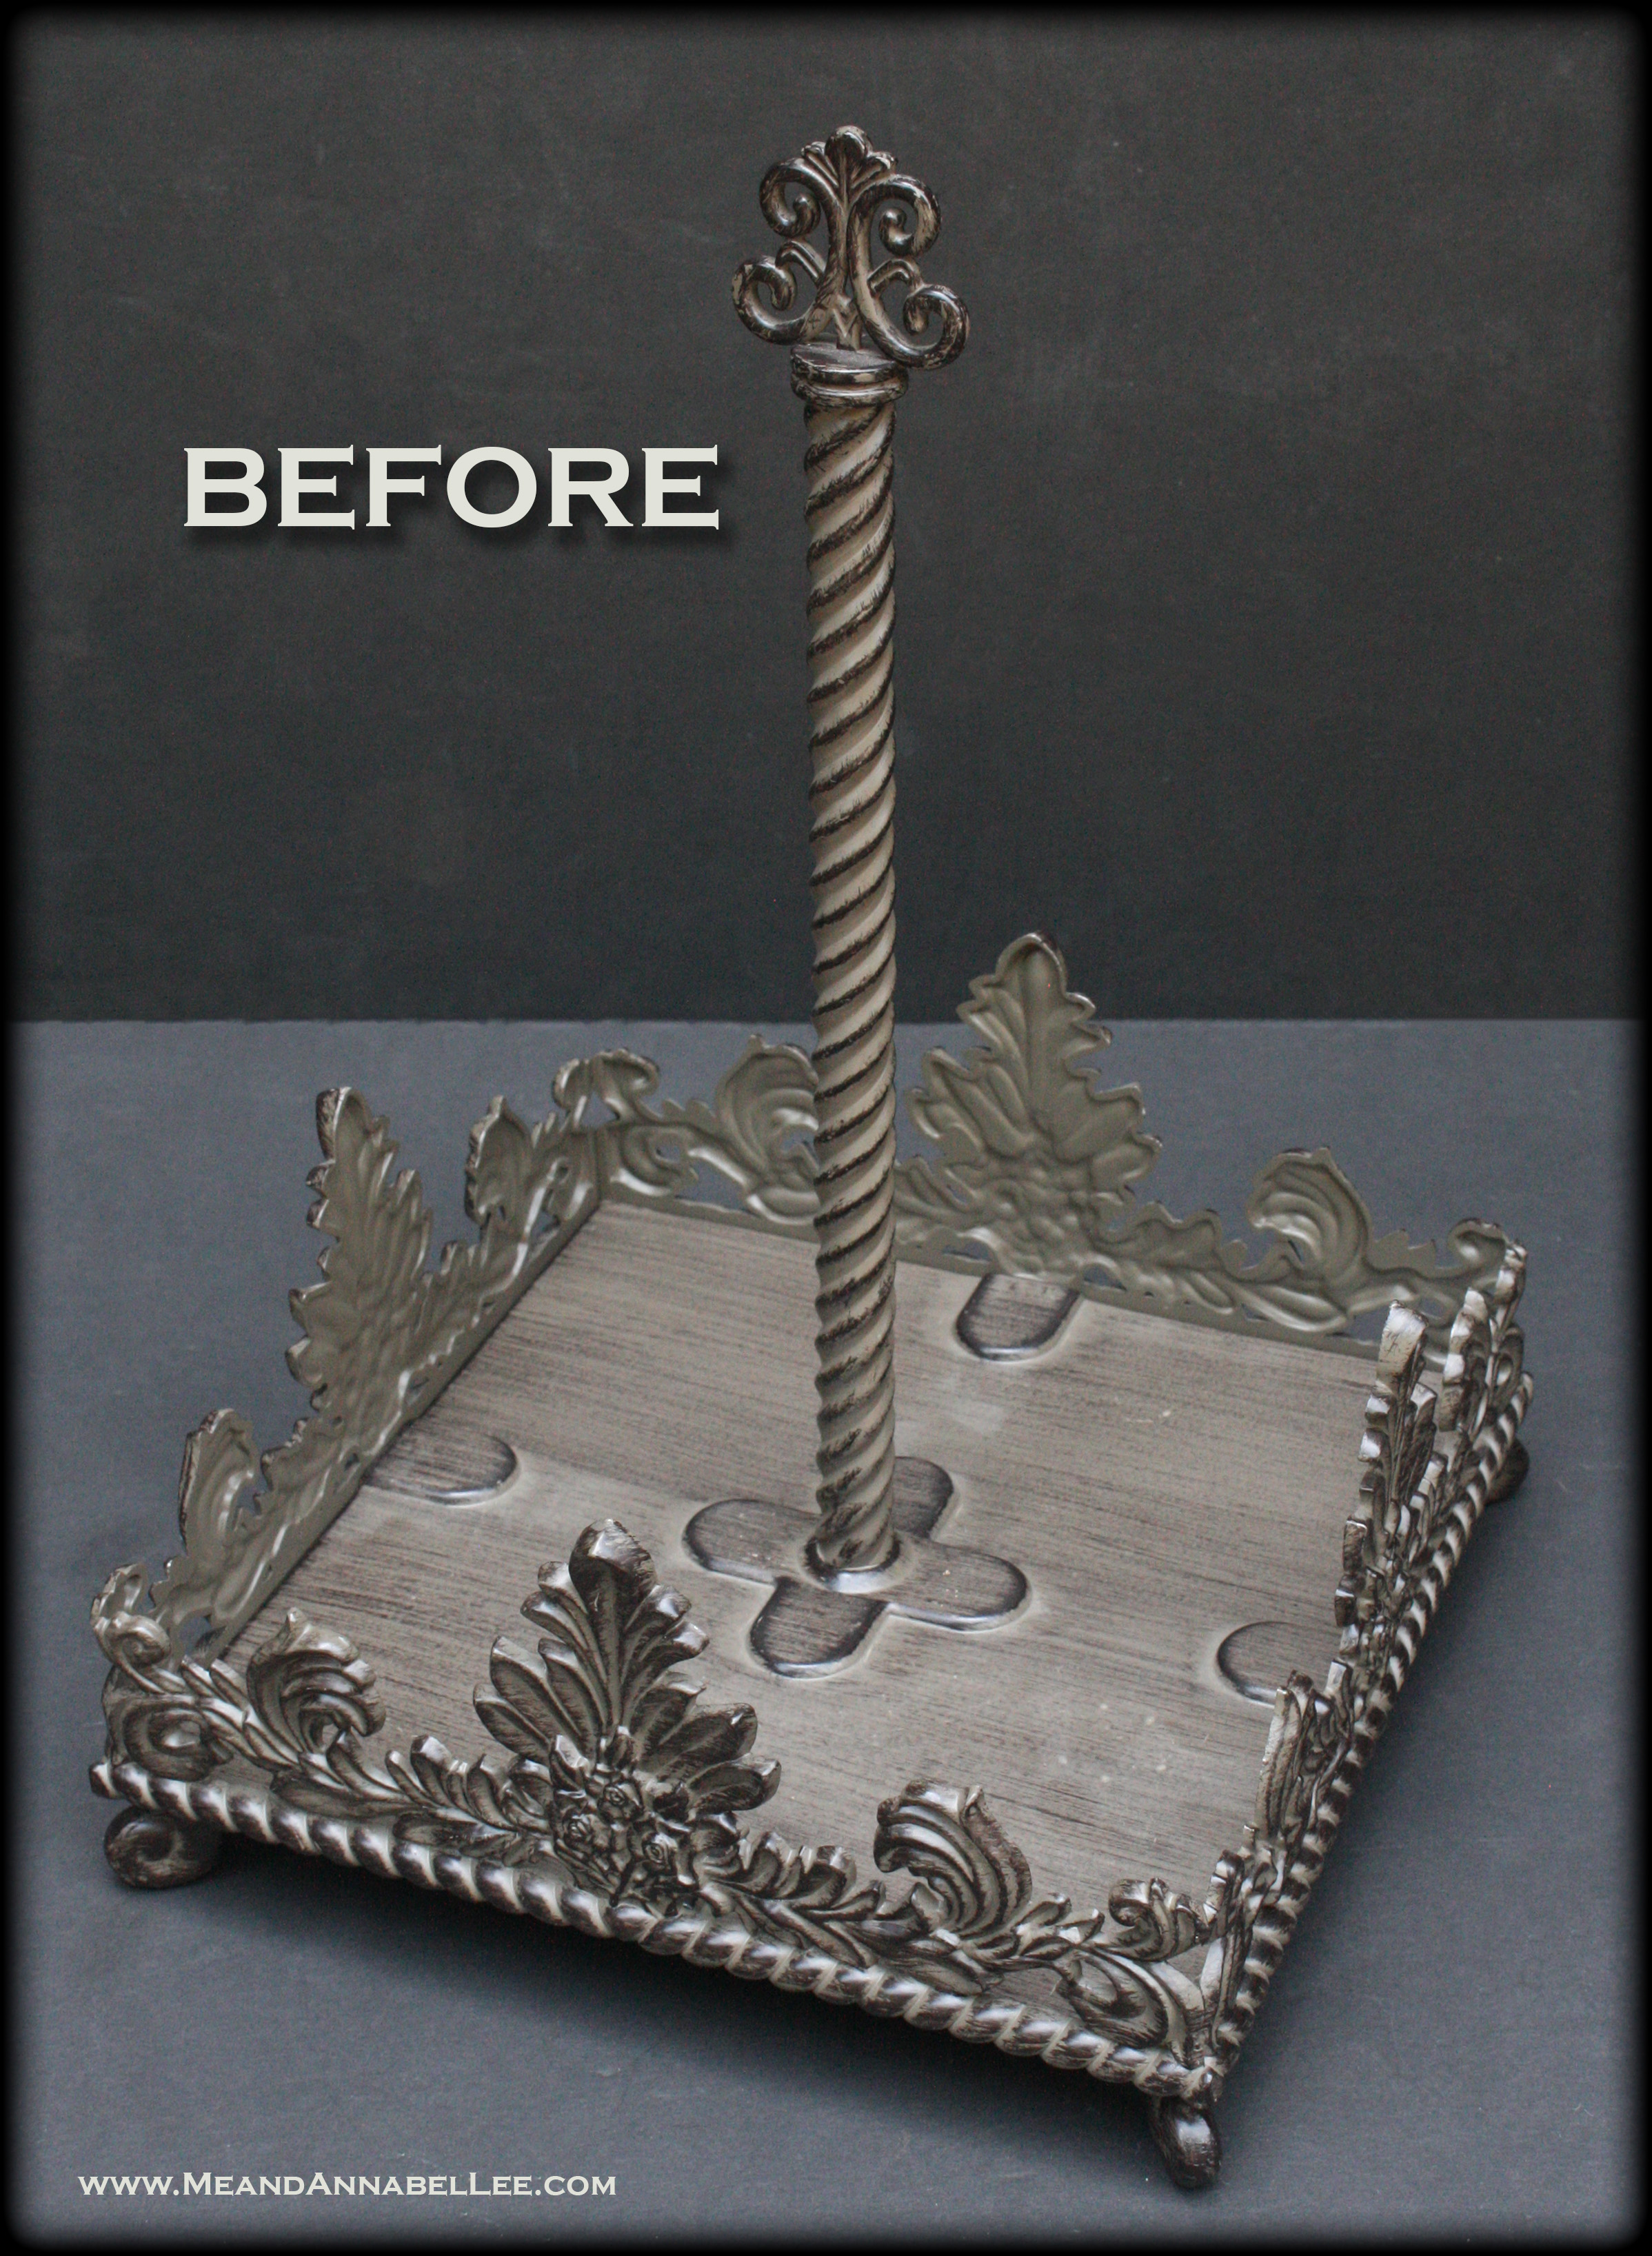 Trash to Treasure - Transform a thrift store find into a Gothic Bird Skull Serving Tray... www.MeandAnnabelLee.com